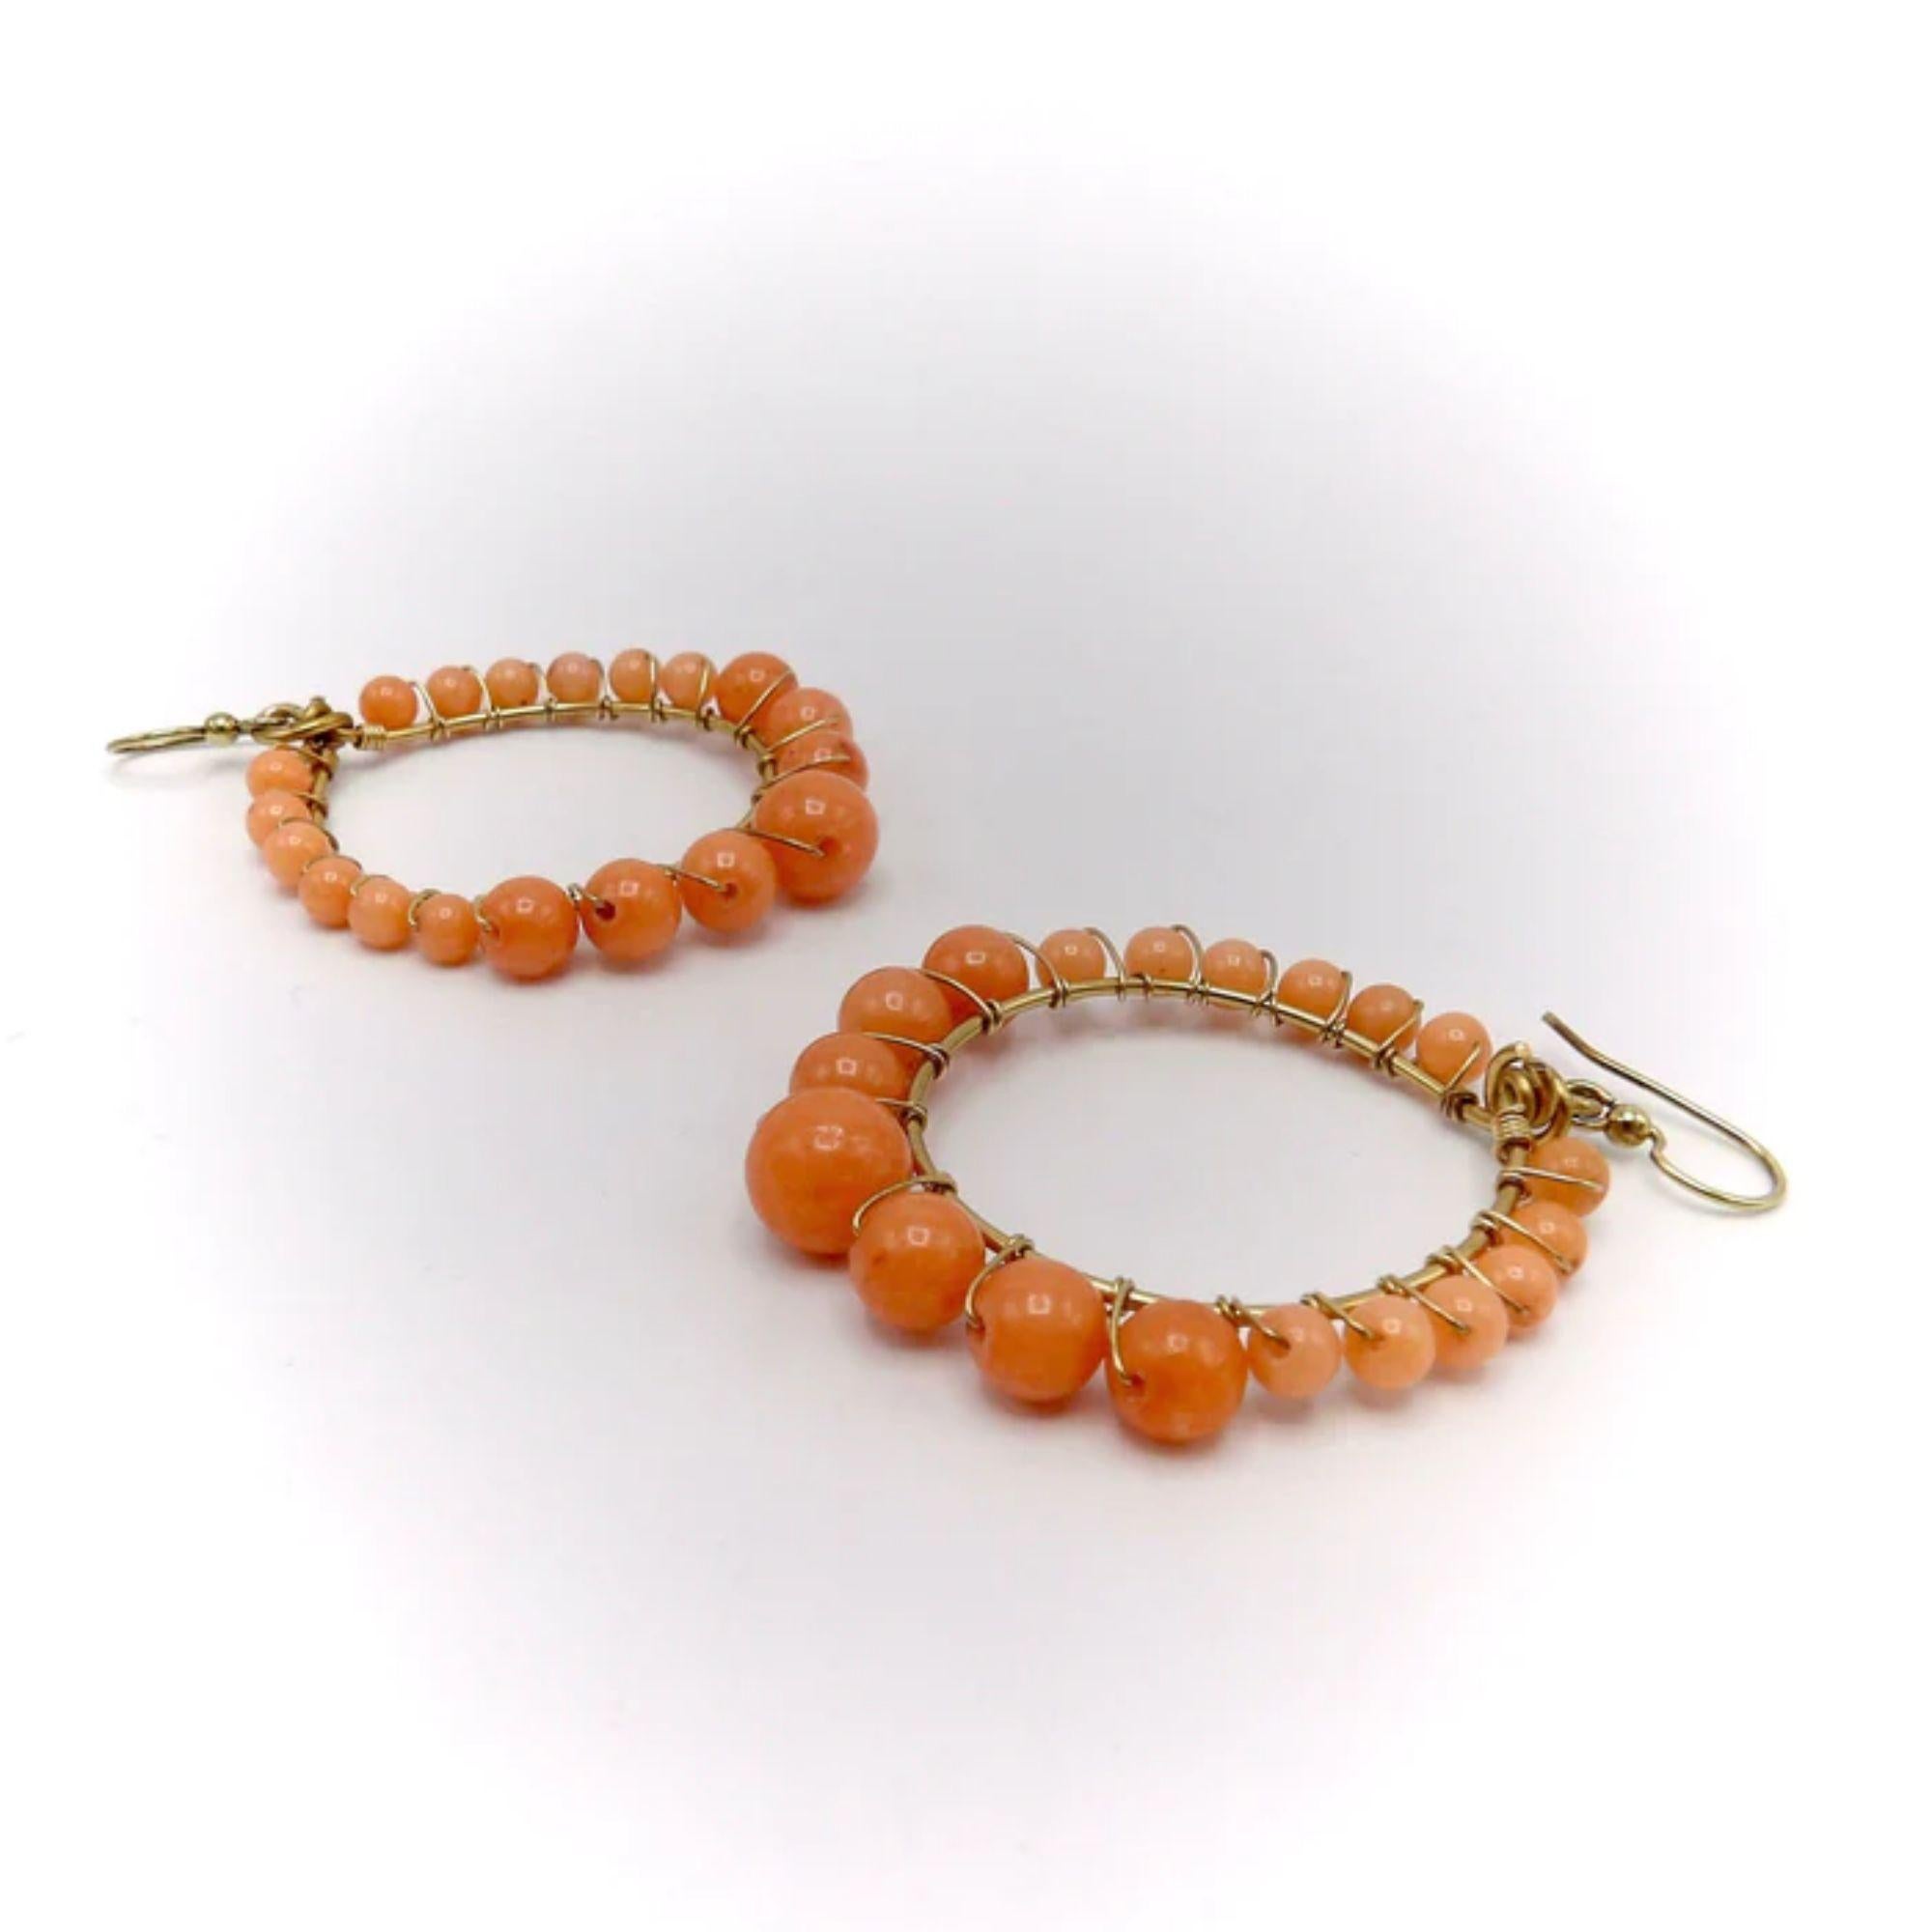 These coral-colored vintage hoop earrings are perfect for the summer! They feature glass beads delicately attached to a 14k gold hoop. The beads closely resemble coral and create a bold yet light hoop variation. 
 
The beads increase in size from to